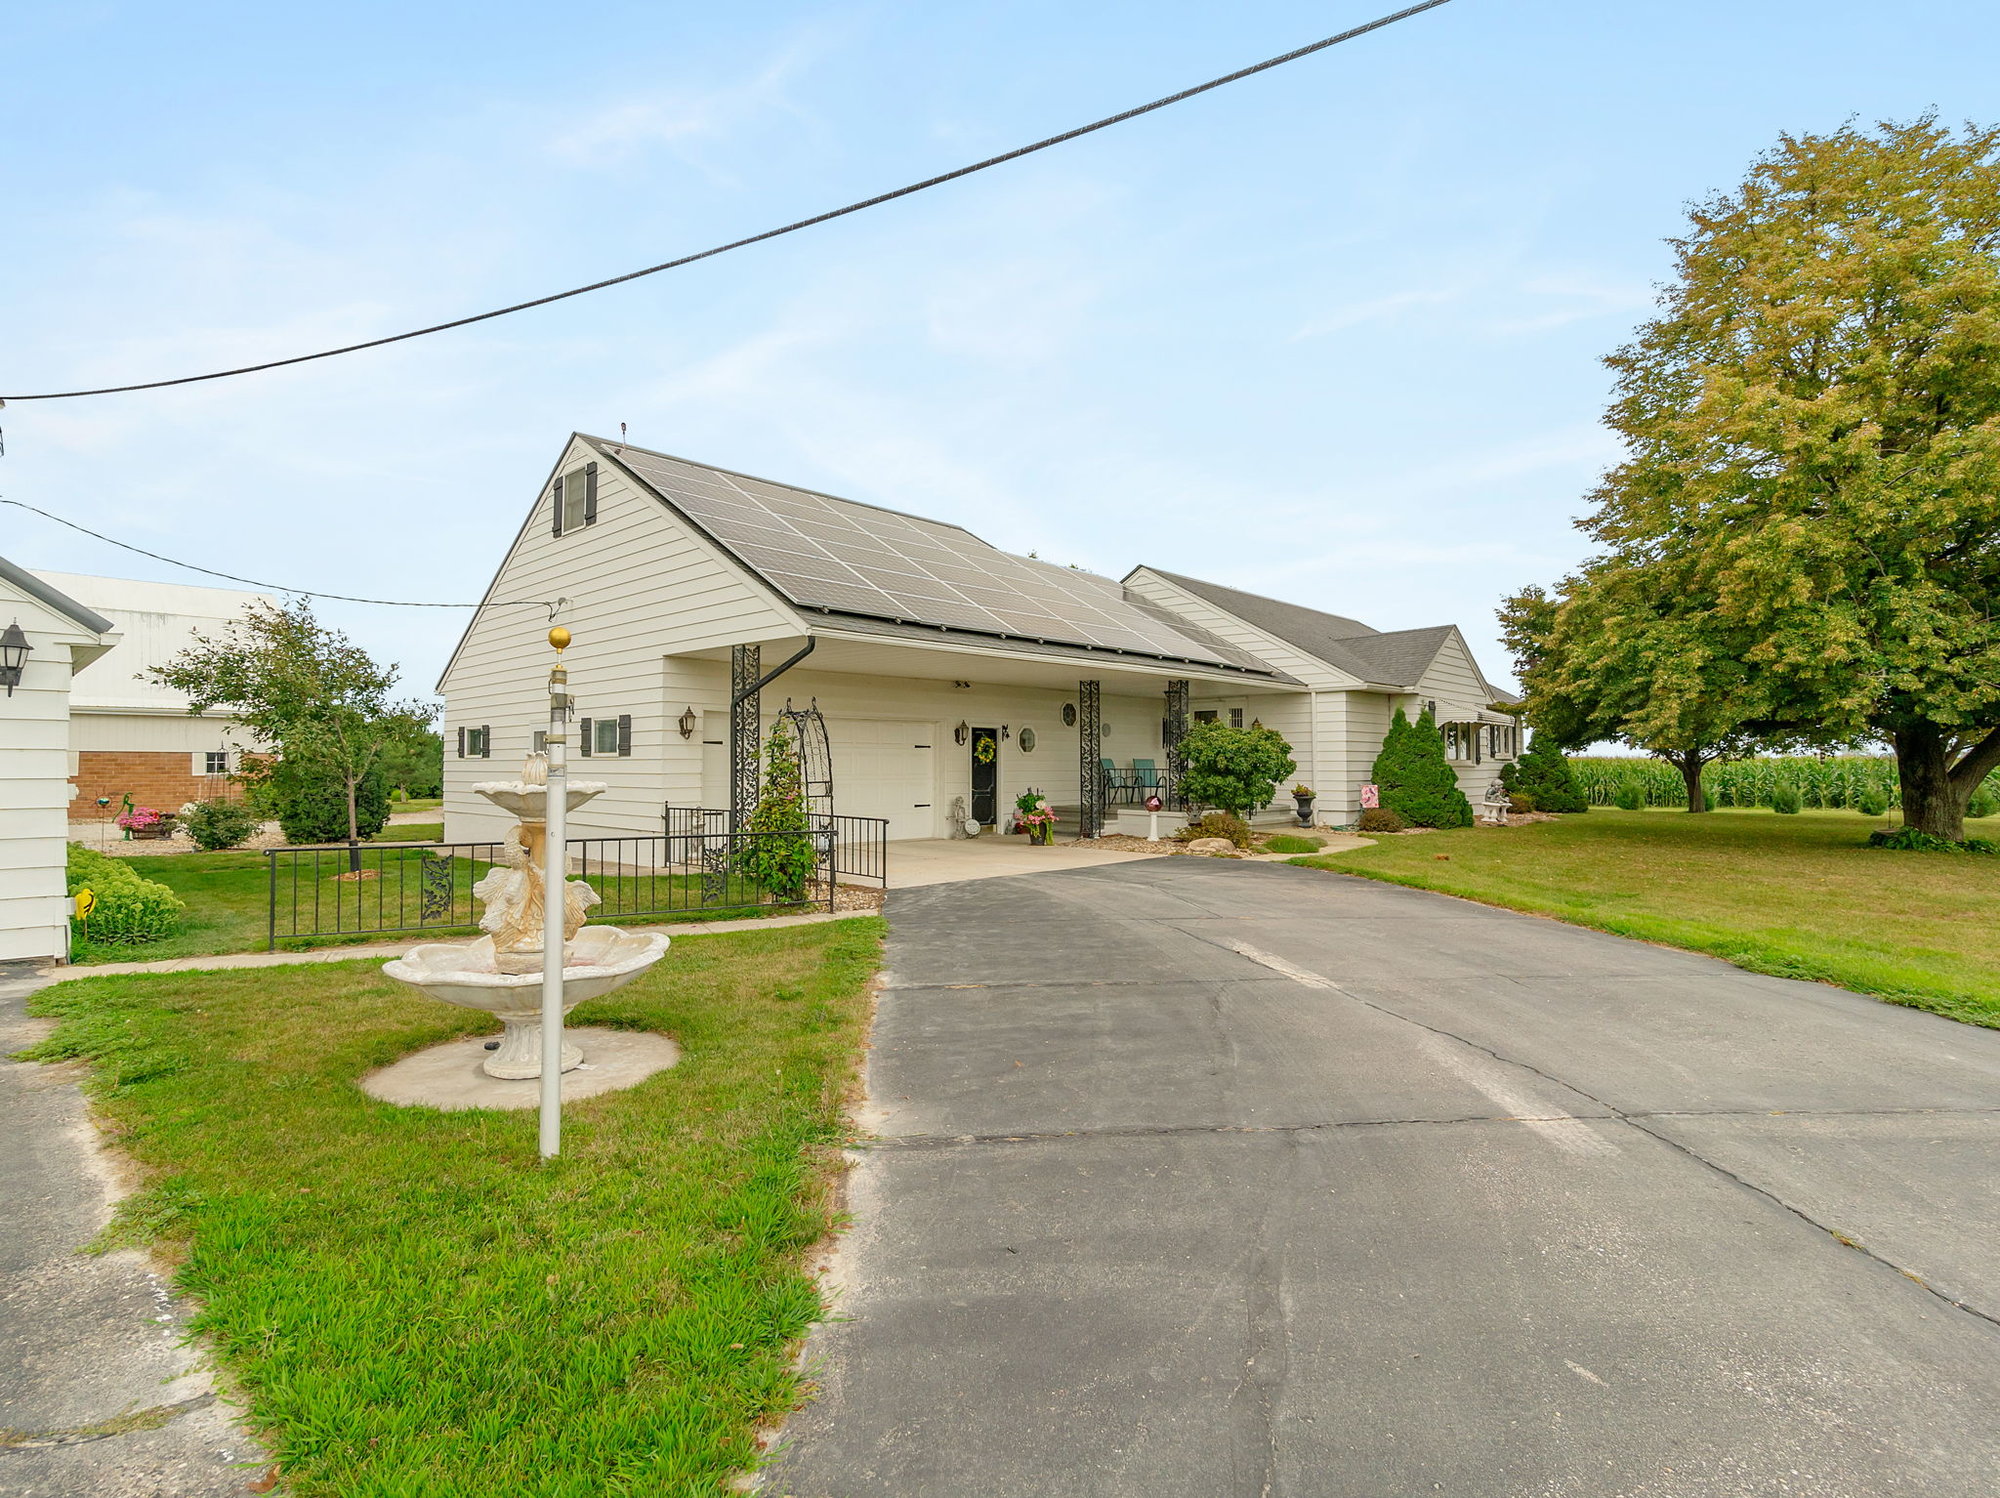 This Acreage in Jesup Iowa Has Everything You Would Want for Small Town Living - 1173 210th St., Jesup